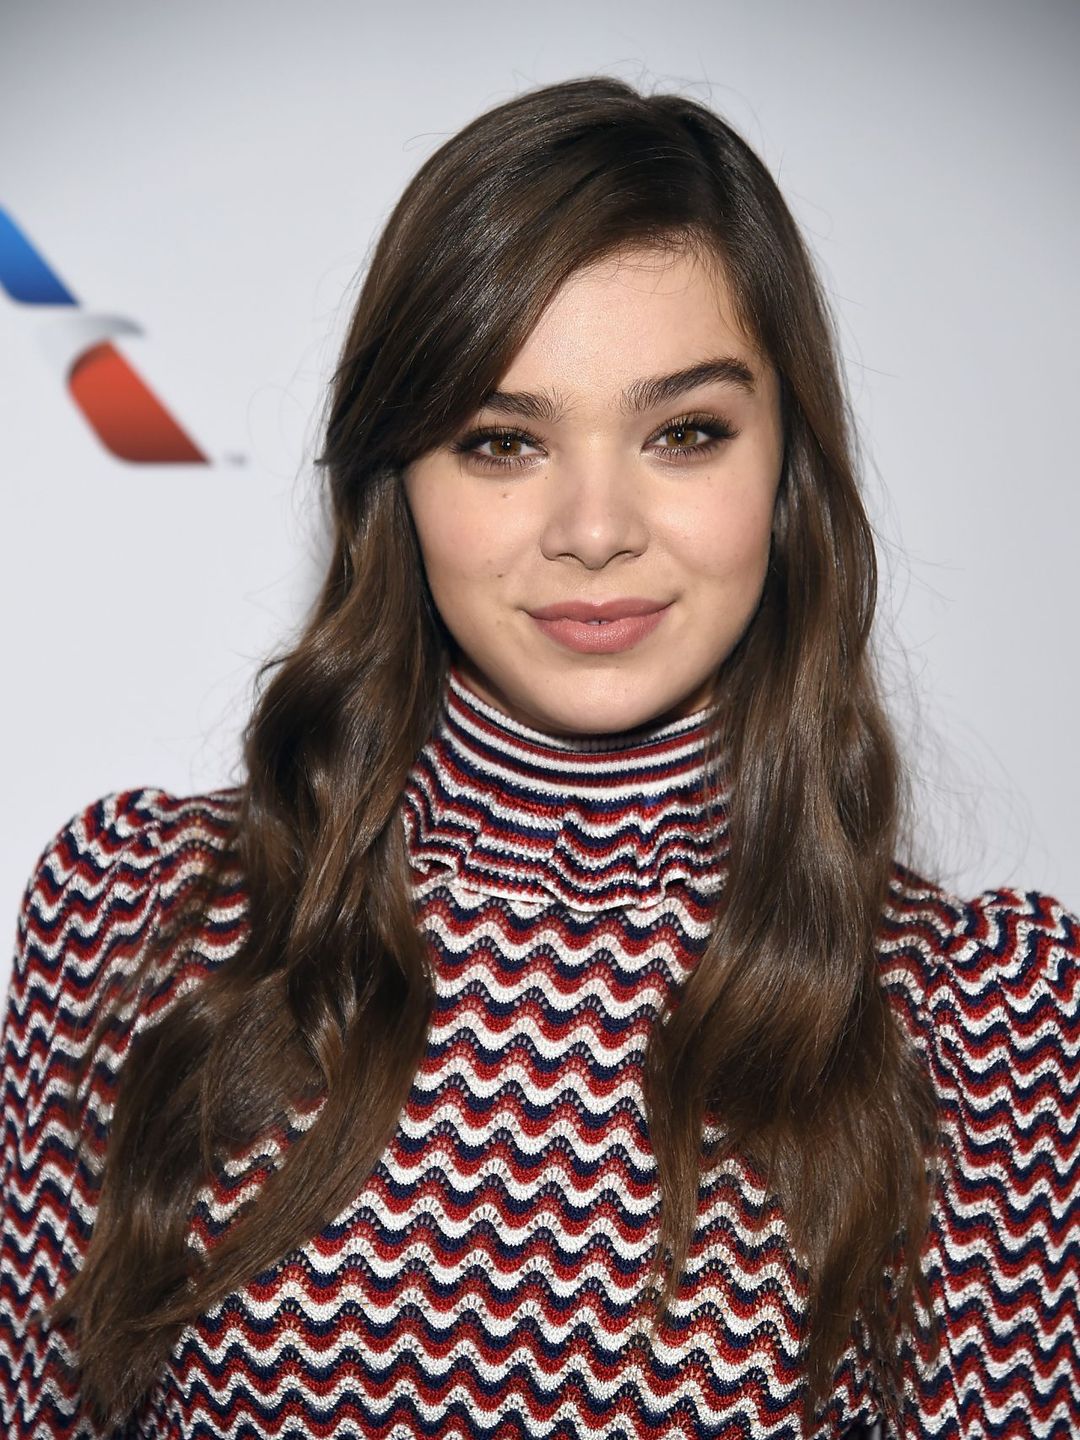 Hailee Steinfeld does she have kids